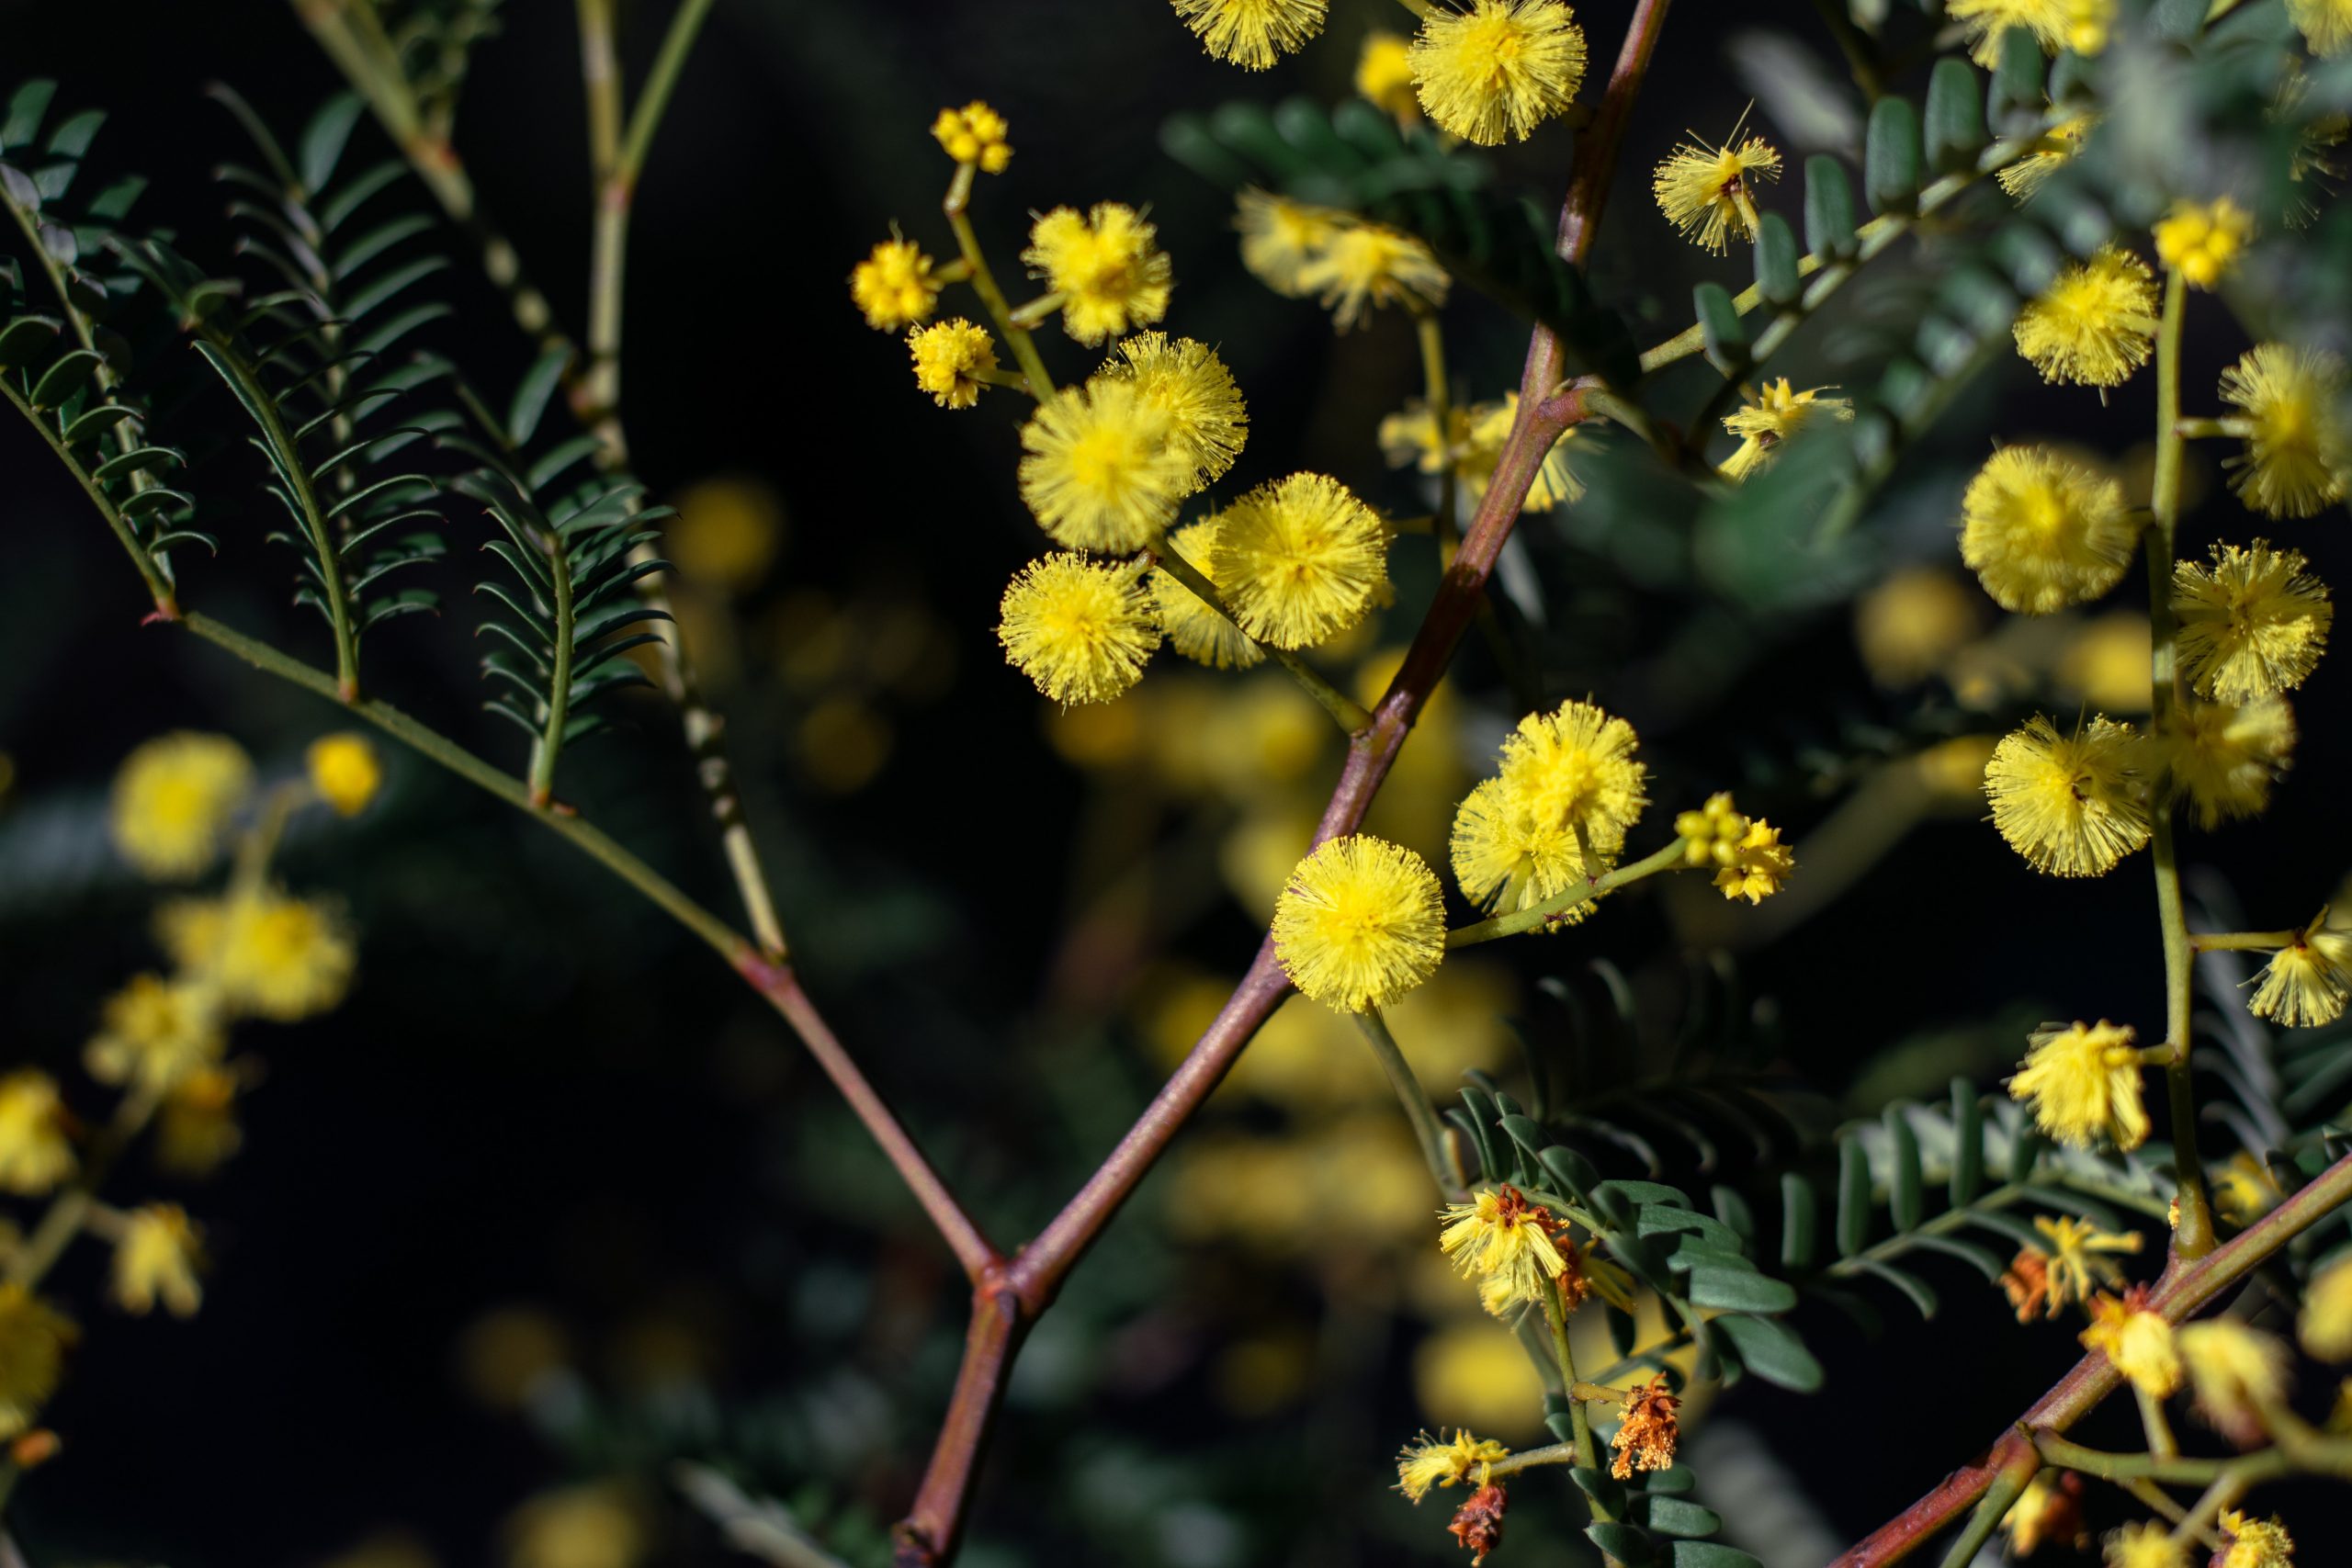 A close up of wattle flowers.